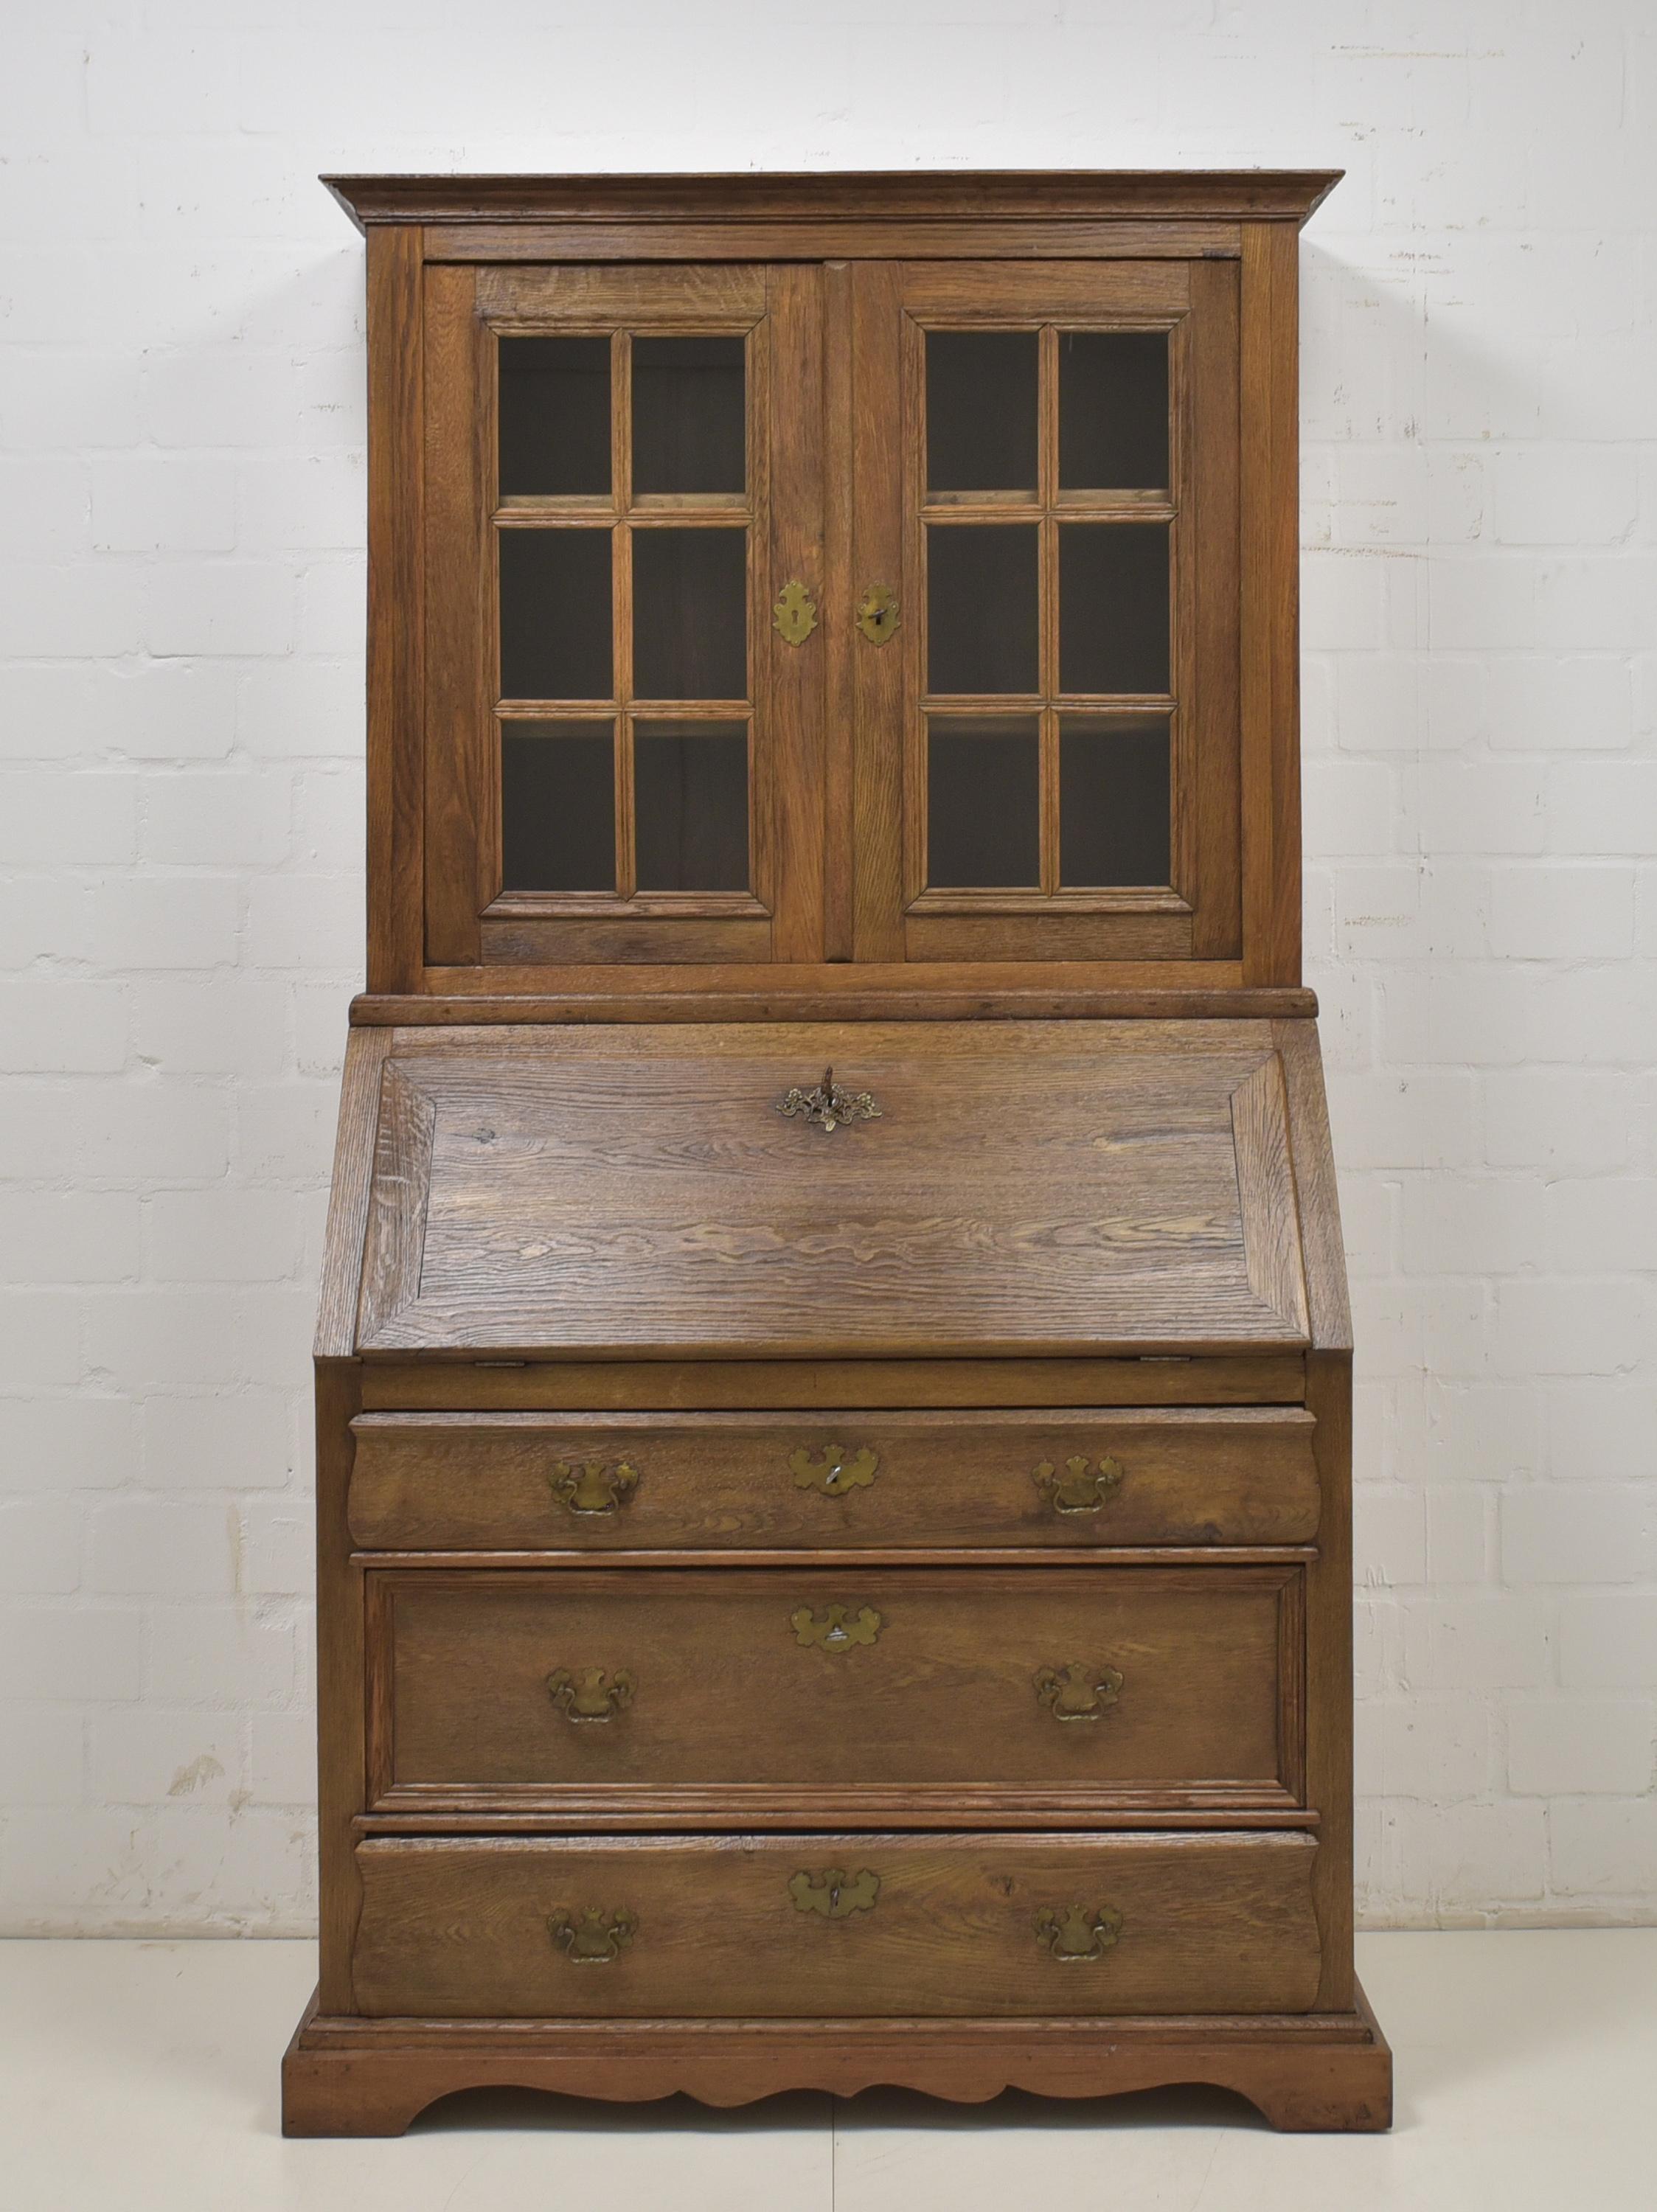 Secretary with showcase restored Biedermeier around 1830 solid oak

Features:
Model with writing flap, three drawers and two-door display case
Interior with seven drawers and one open compartment
High quality
Heavy quality
All drawers